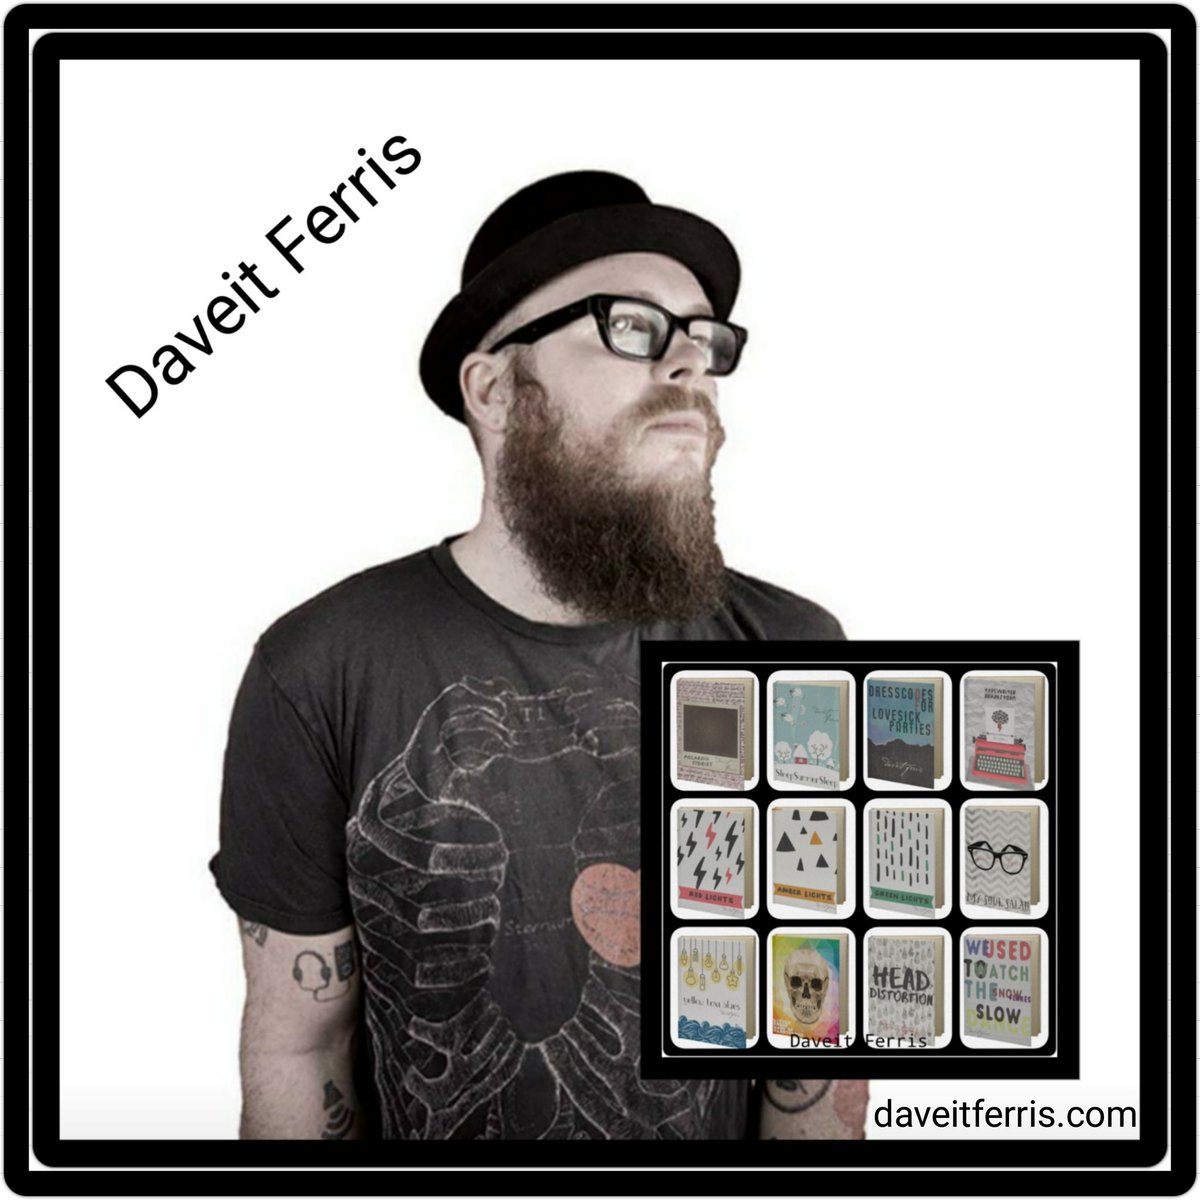 #PoemInYourPocketDay
All of #DaveitFerris' INCREDIBLE poetry books are downloadable. So, you can carry his poems in your pocket every day on your phone. Pick yours up at daveitferris.com today!!!  #NationalPoetryMonth #Poetry #Poem #Poems #Poet #PoetryBooks